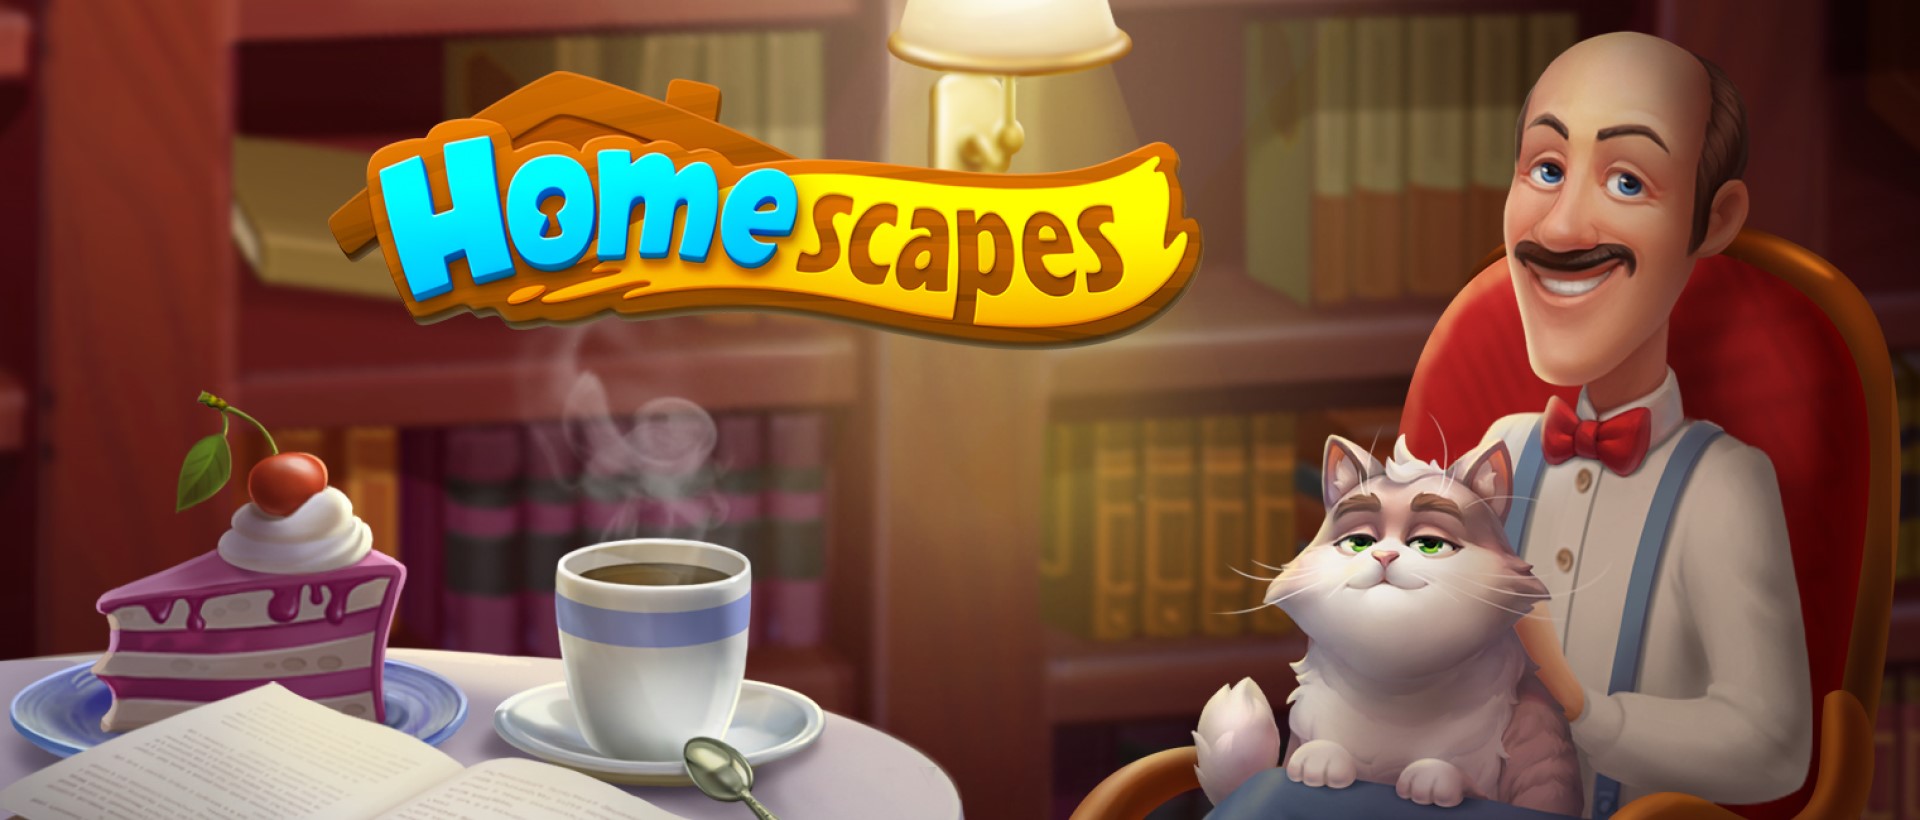 homescapes game download for pc